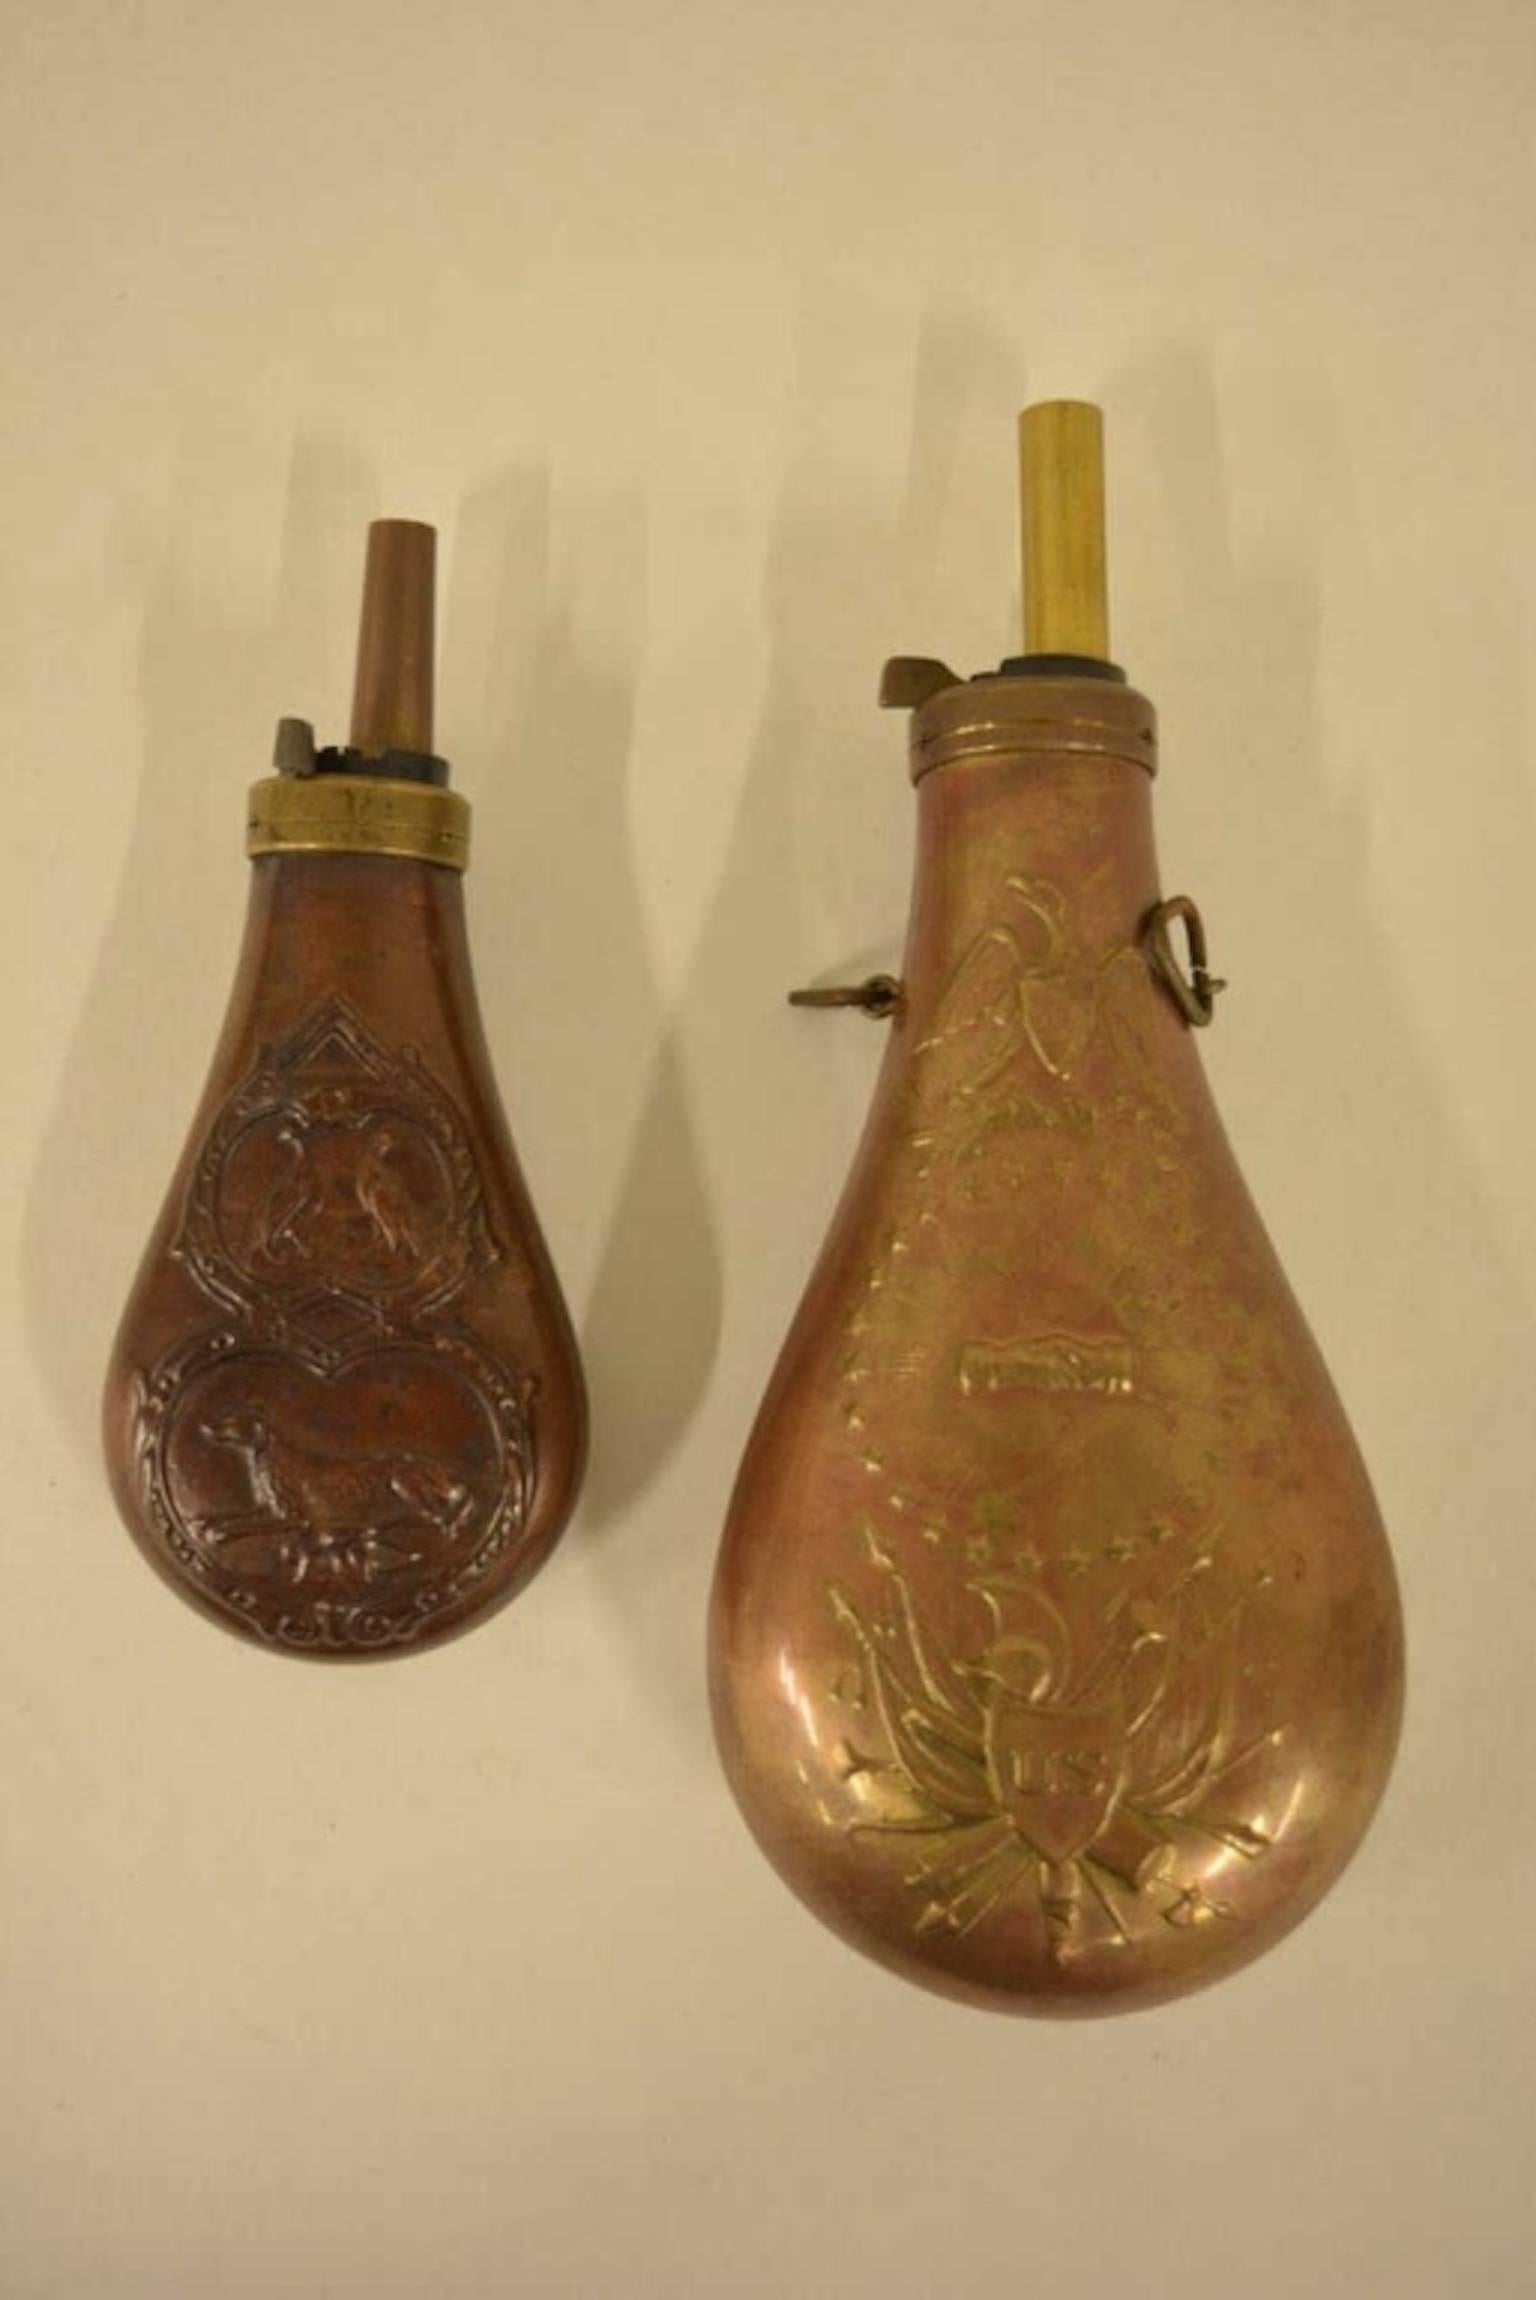 Nice lot of two antique gun powder flasks. Neither of the flasks have makers marks.
The larger flask has the civil war eagle and the other has a hunting dog motif.
Largest flask measures approximately 9 inches long by 4 inches across
Smaller